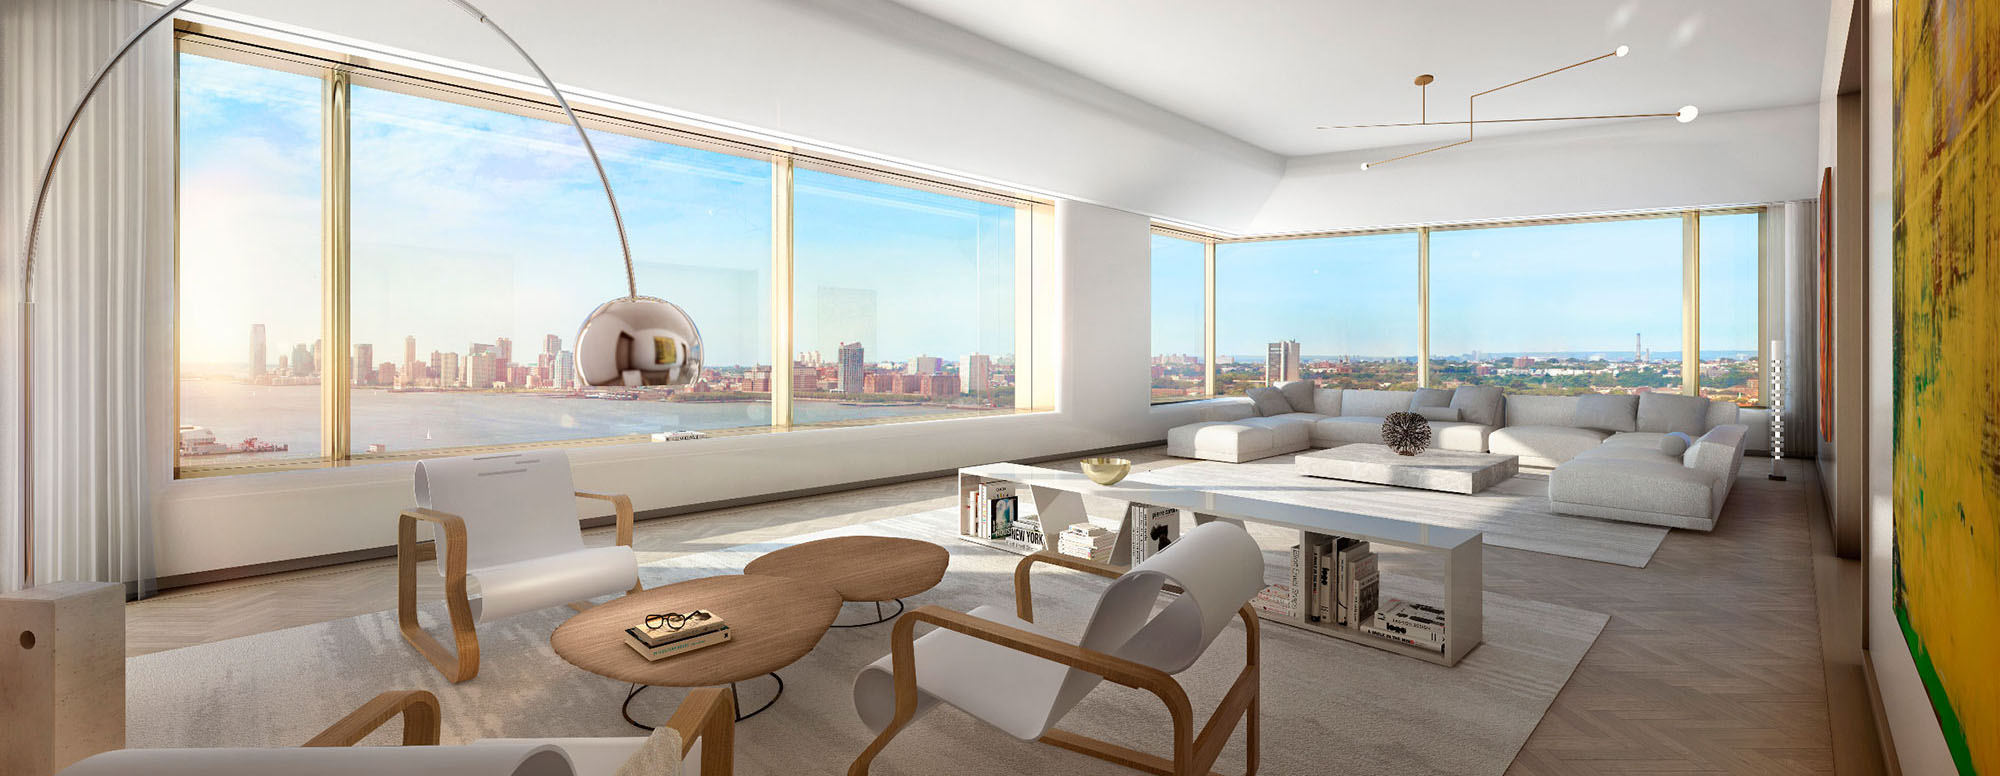 Top 50 Luxury Rental Apartment Buildings In Nyc Ny Nesting